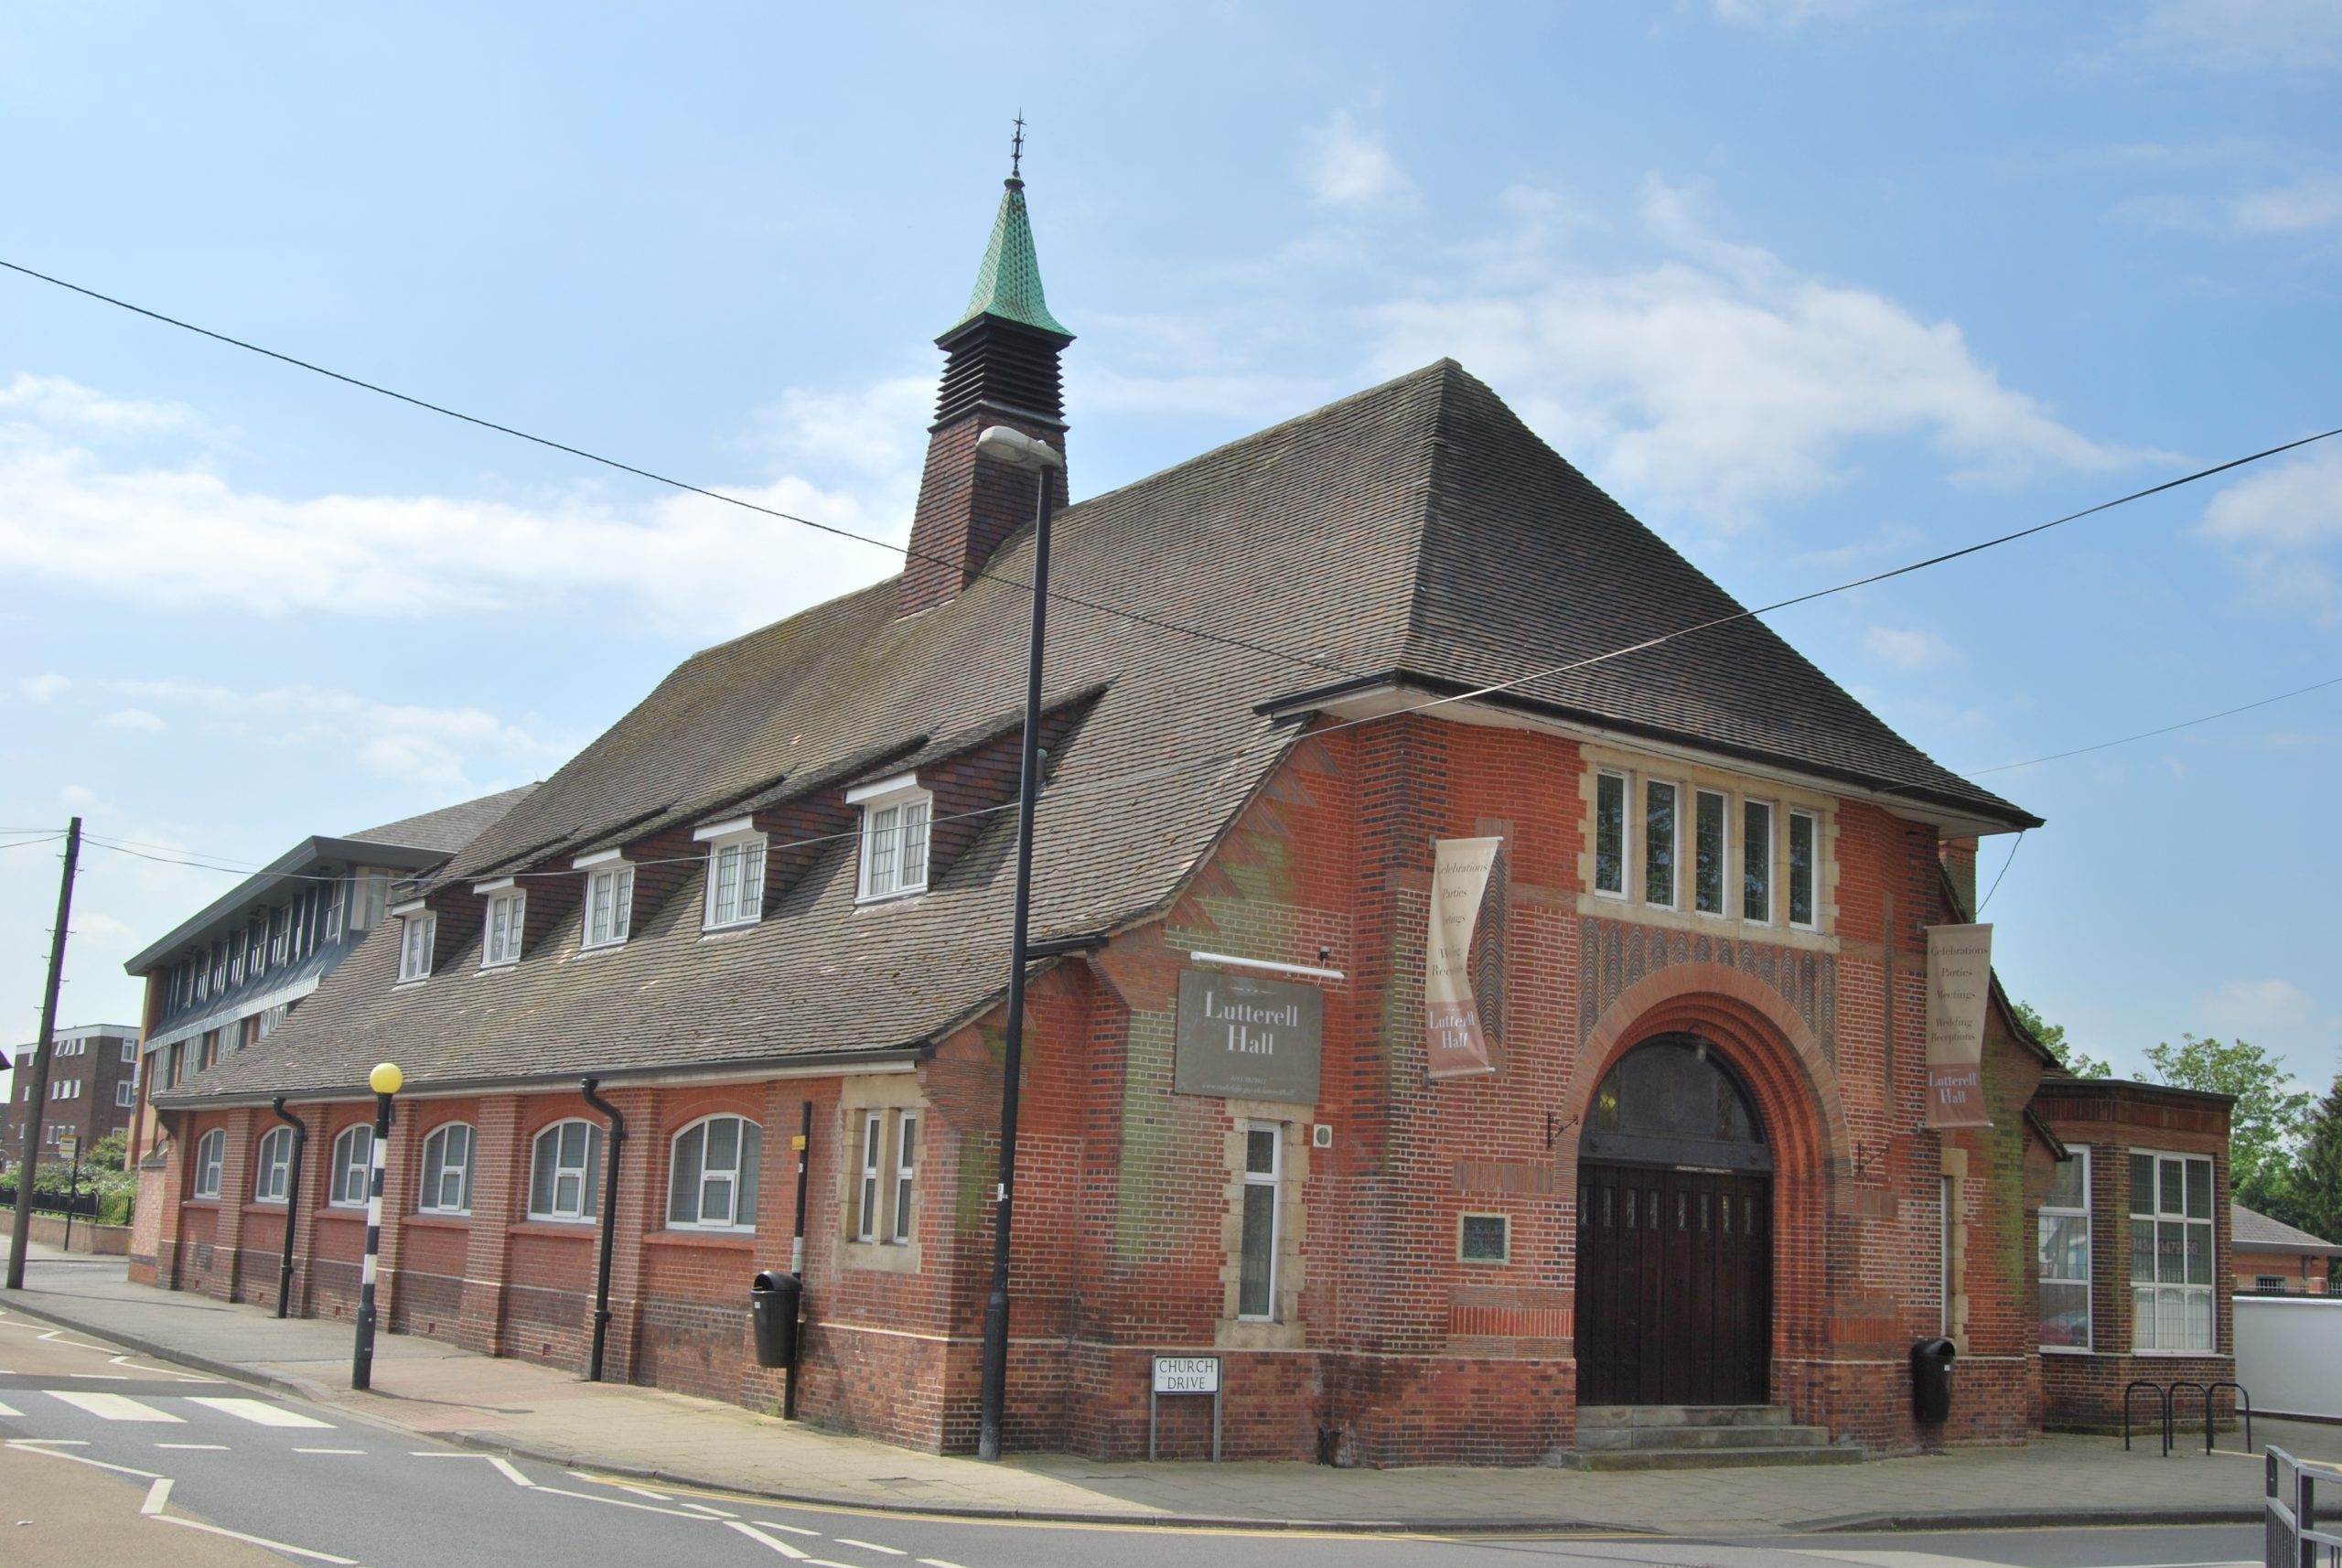 Rushcliffe Borough Council has signed a lease agreement with The Rock Church to manage Lutterell Hall scaled